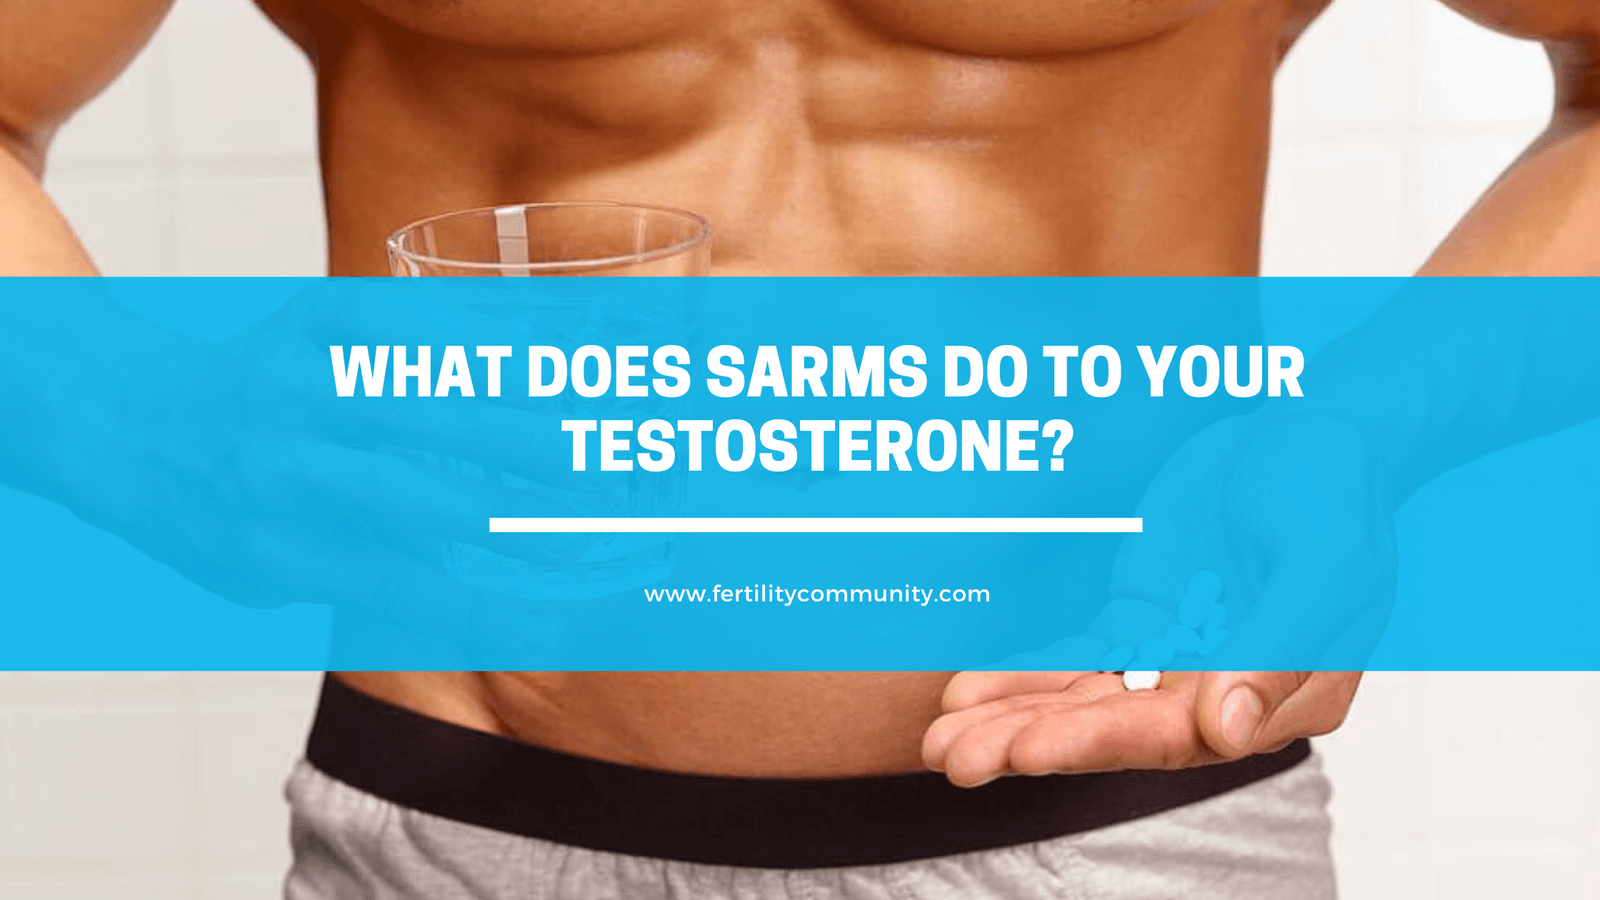 What Does SARMS Do To Your Testosterone